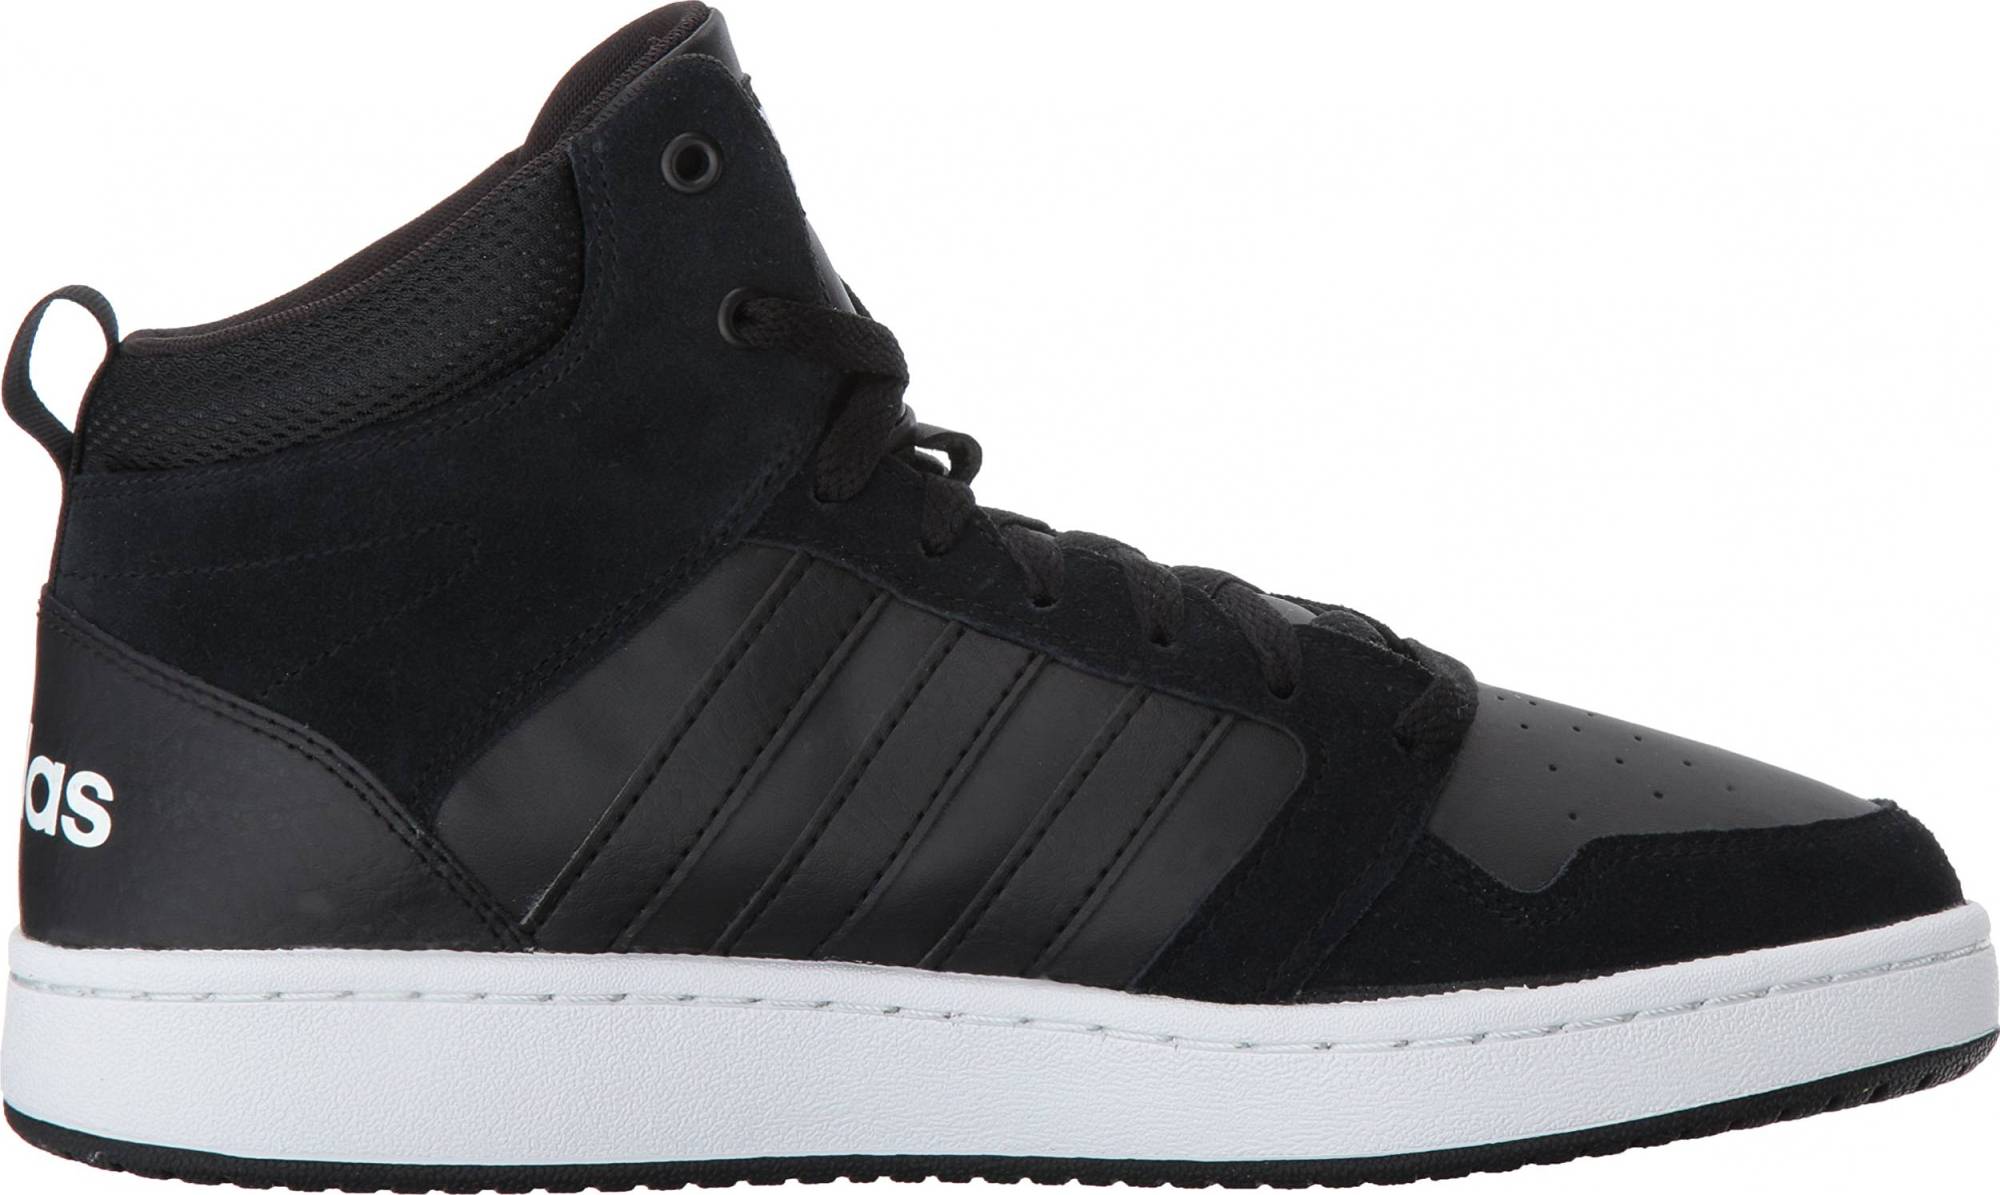 Adidas Cloudfoam Super Hoops Mid – Shoes Reviews & Reasons To Buy